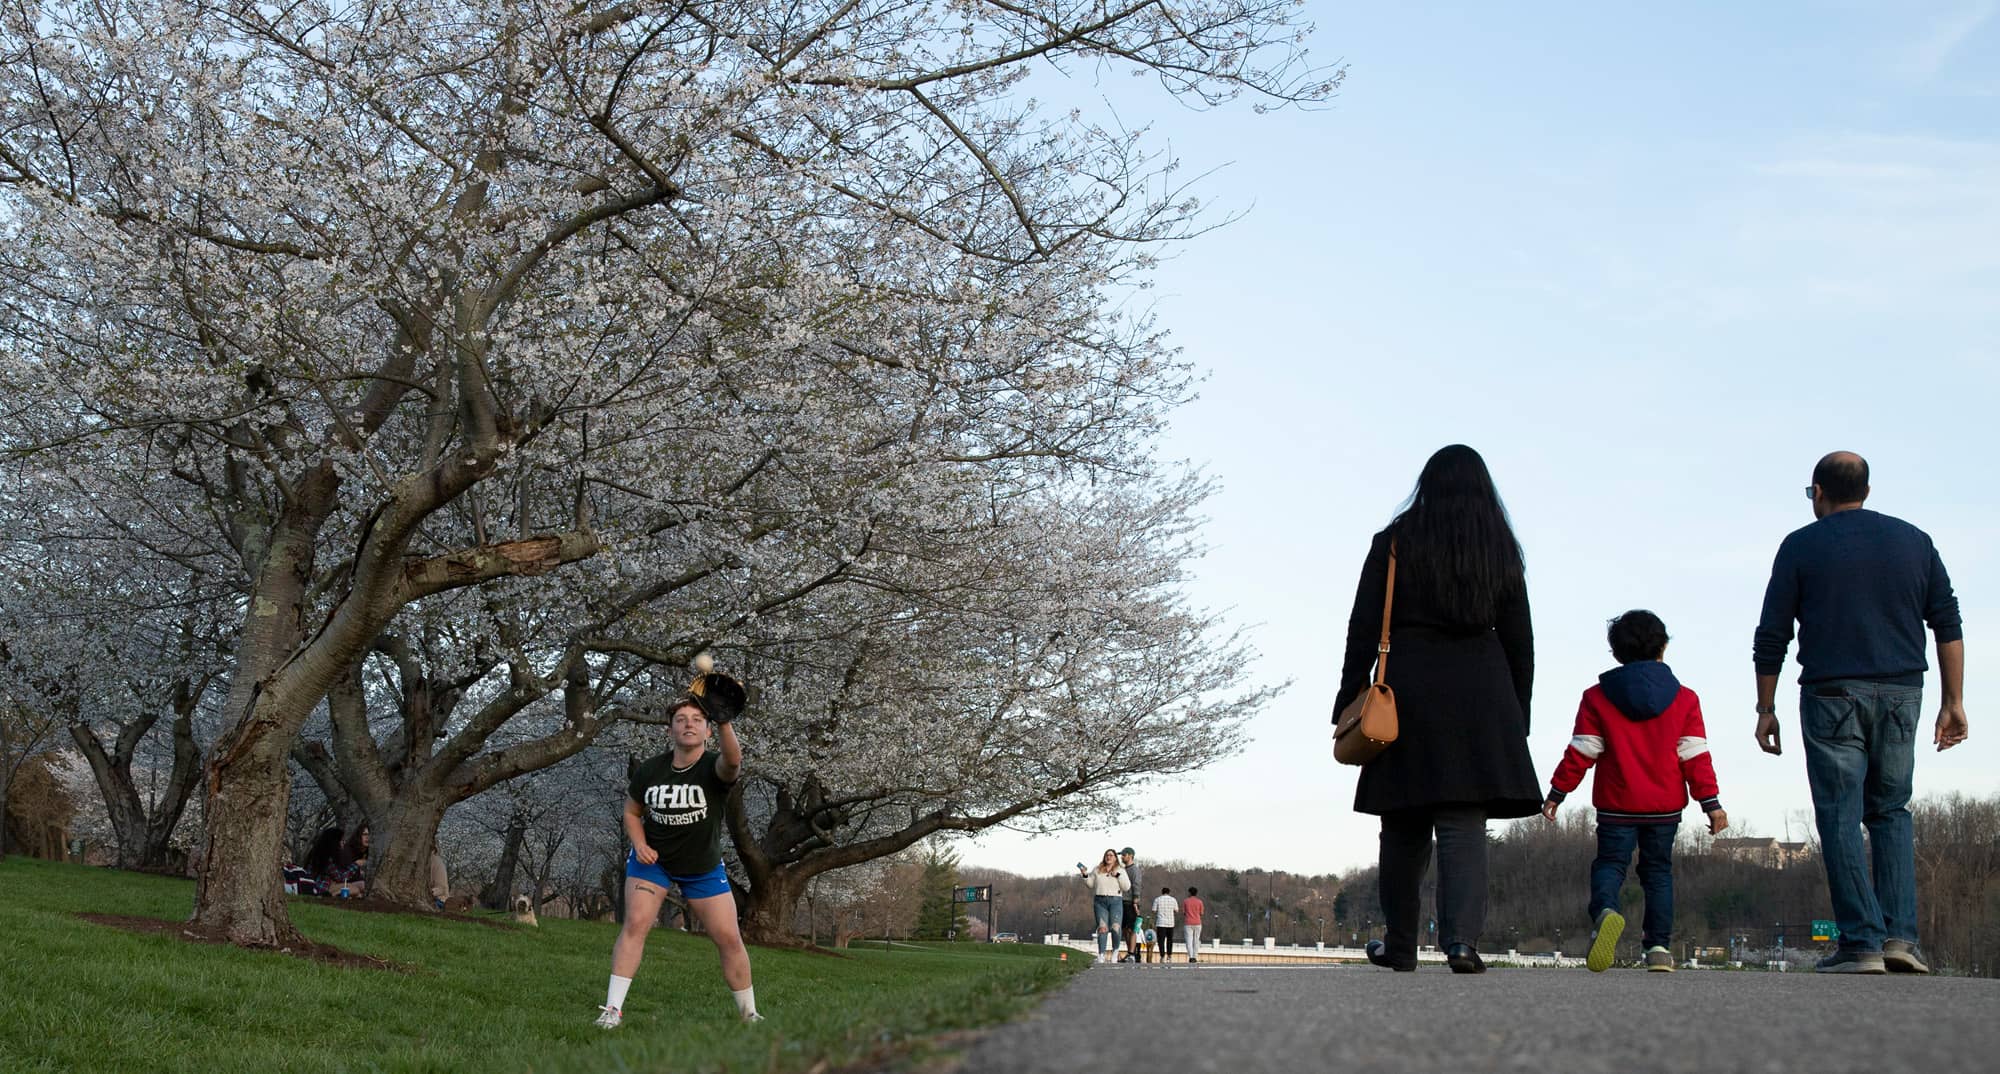 People enjoy the Cherry Blossom Trees on Sunday, April 10, 2022, in Athens, Ohio